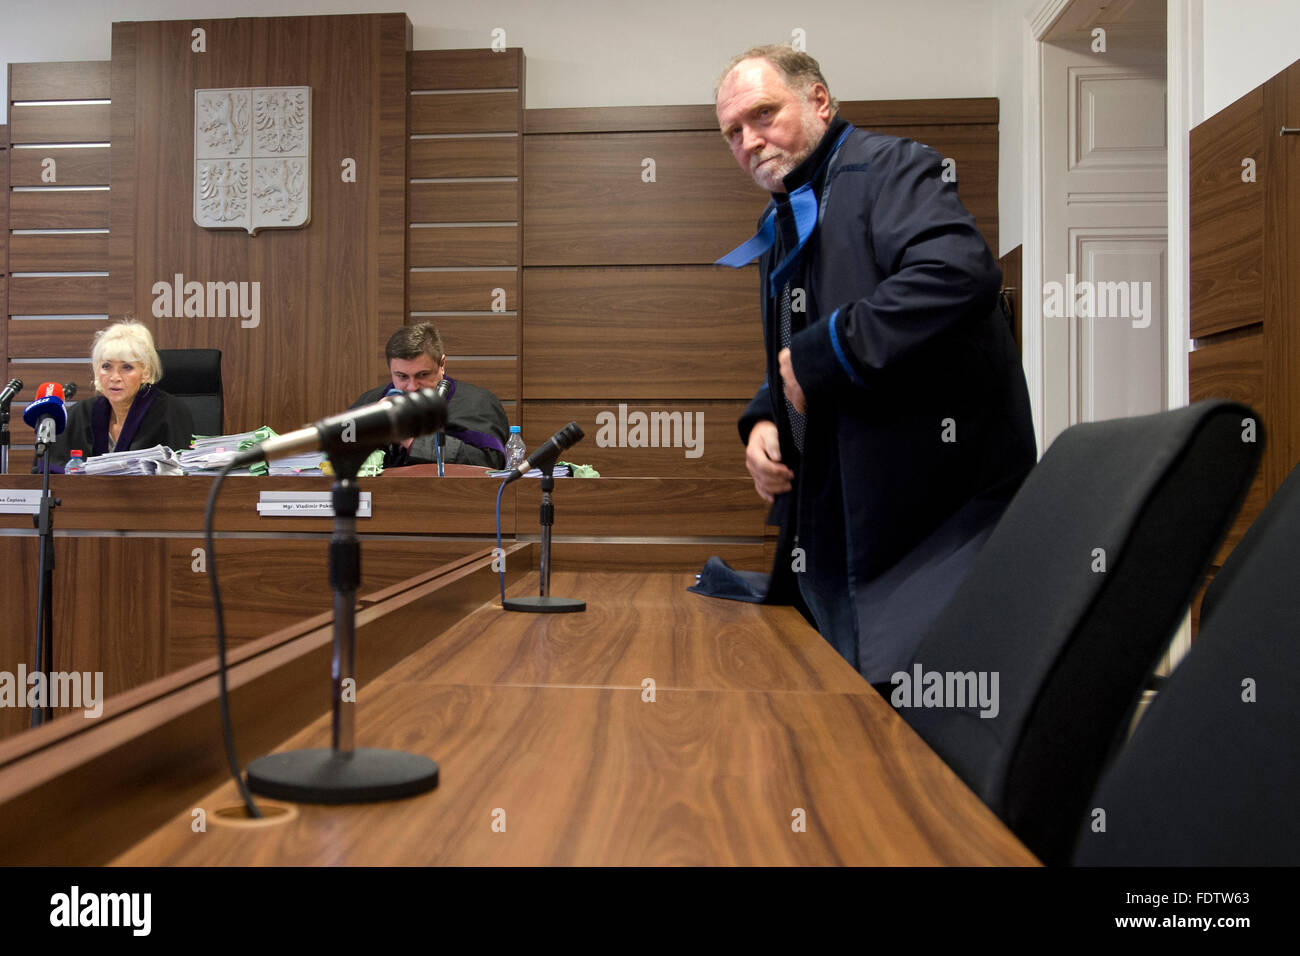 Czech lobbyist Marek Dalik (on the photo Tomas Sokol, lawyer of suspect Dalik) was sentenced to five years in prison and a five-million-crown penalty for corruption accompanying the purchase of the Pandur armoured personnel carriers (APCs) for the Czech military, the Prague Municipal Court ruled today, on Tuesday, February 2, 2016. The verdict can be appealed. Dalik pleads not guilty. The police investigated Dalik, adviser to former prime minister Mirek Topolanek (Civic Democrats, ODS), based on the testimony of Stephan Szcuecs, former employee of the Austrian Steyr firm, who said Dalik demand Stock Photo